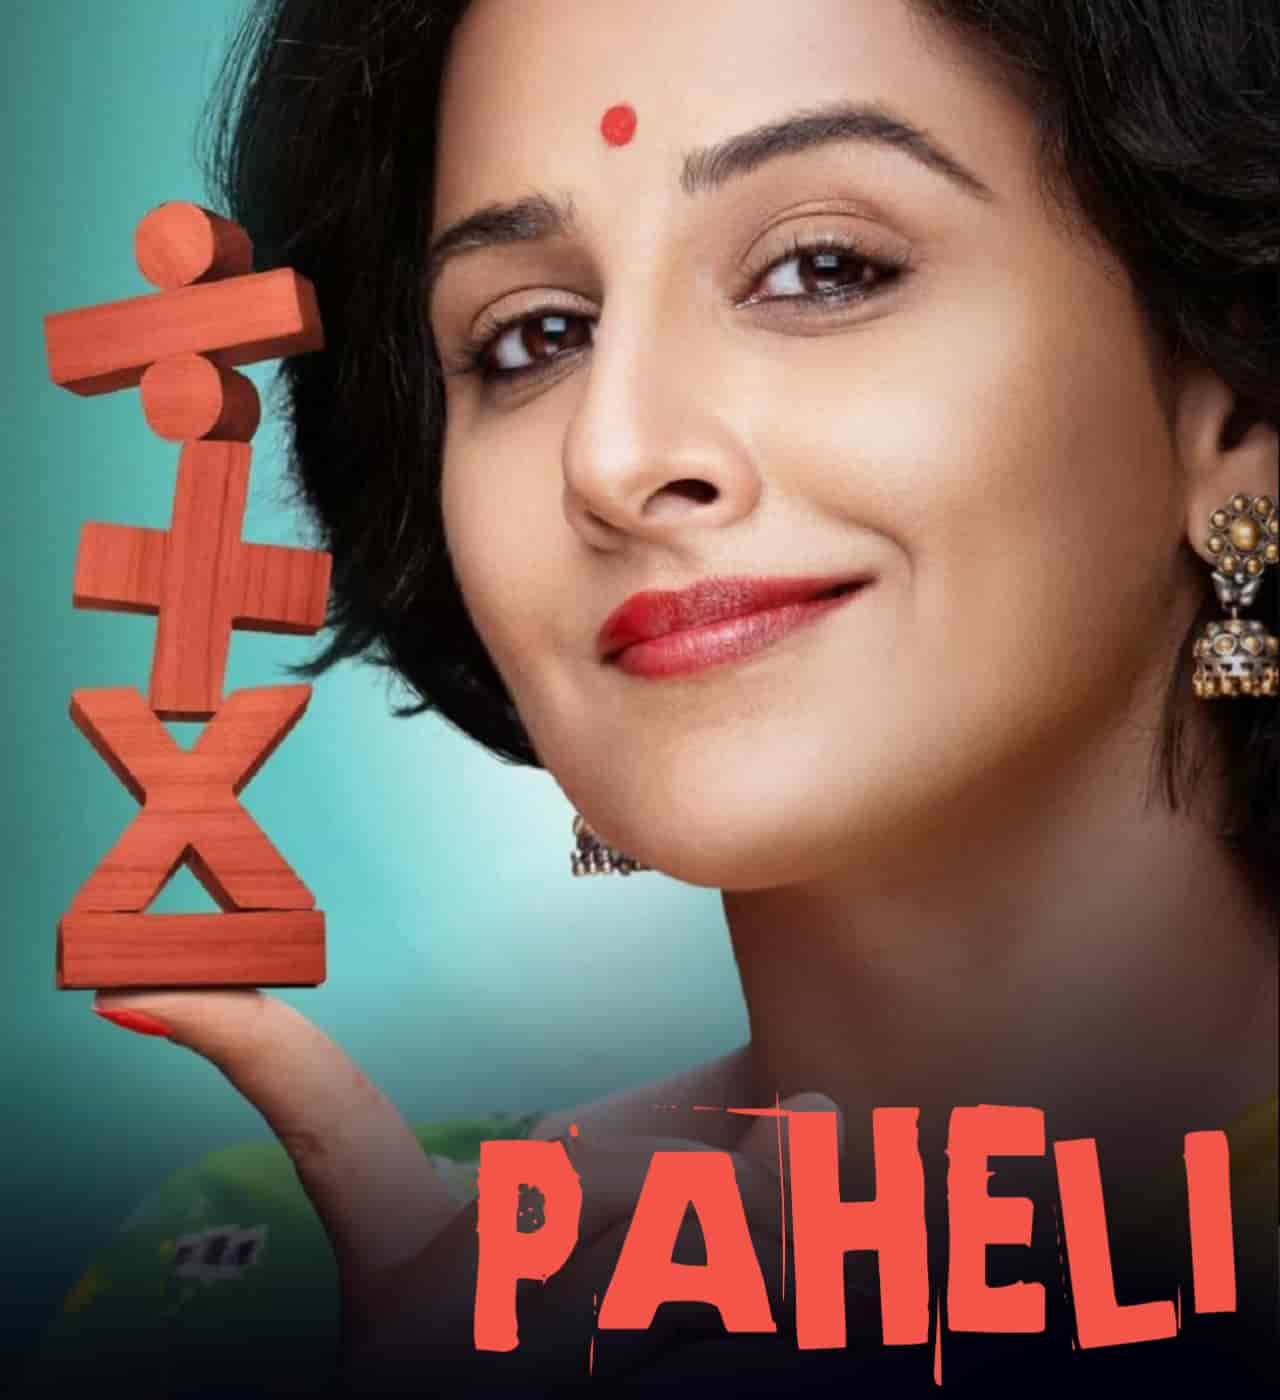 A beautiful hindi song of movie Shakuntala Devi has released which is titled Paheli sung by classical queen Shreya Ghoshal. Very famous actress Vidya Balan is featuring in this song as lead role. This movie is about genius lady Shakuntala Devi's real life who has world record on multiplication history. Music of this song has given by Sachin-Jigar while this song Paheli lyrics has penned by Priya Saraiya. This song is presented by Zee Music Company label.